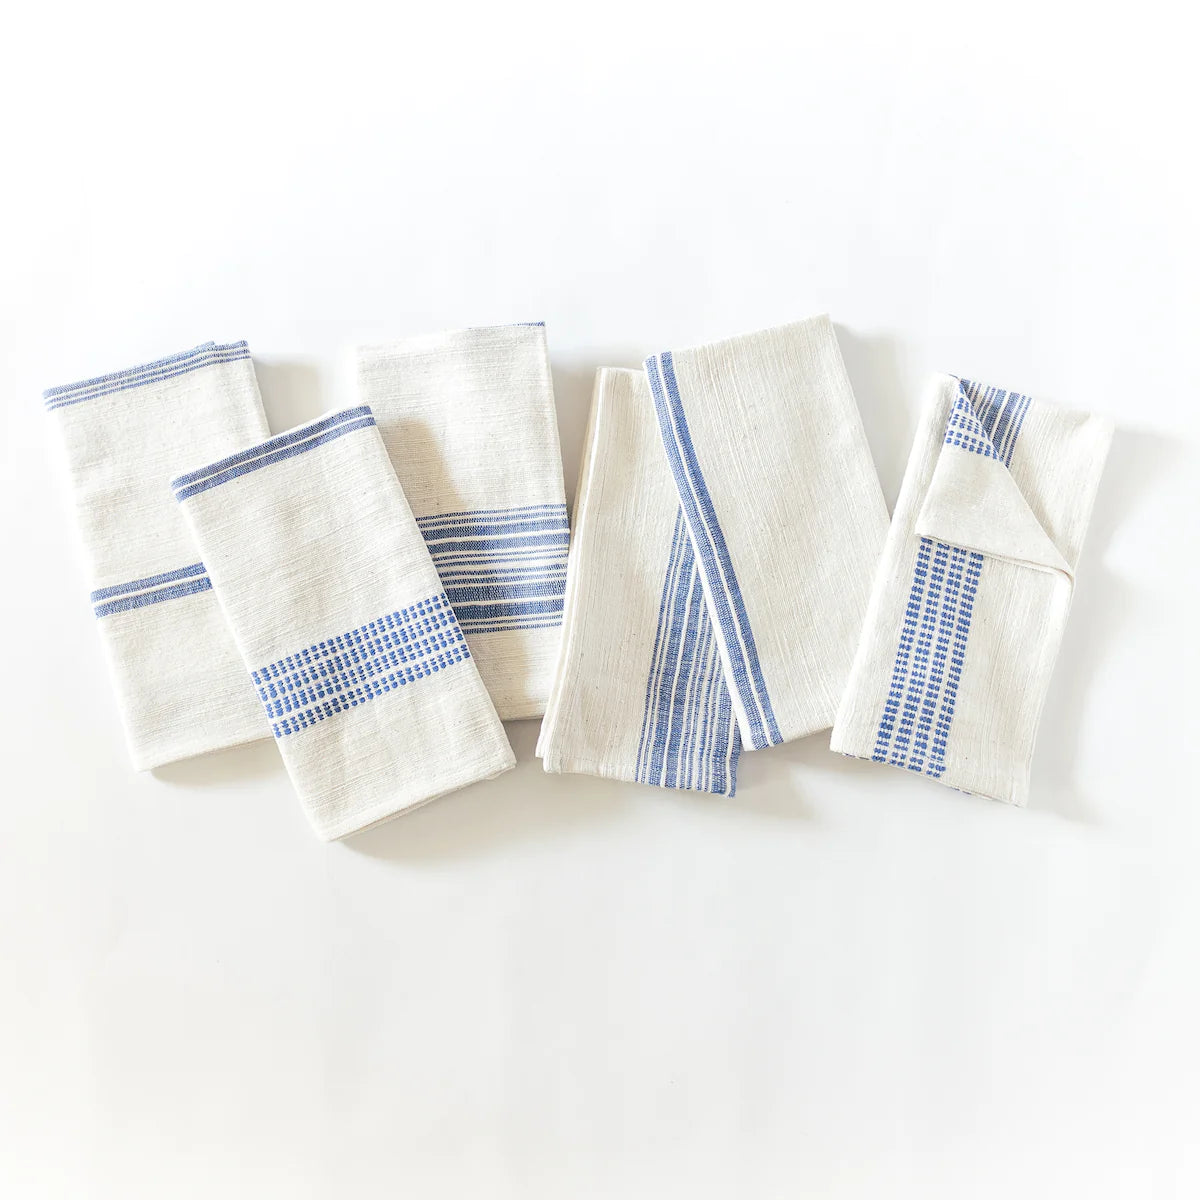 Natural with Blue Cotton Napkins, S/6